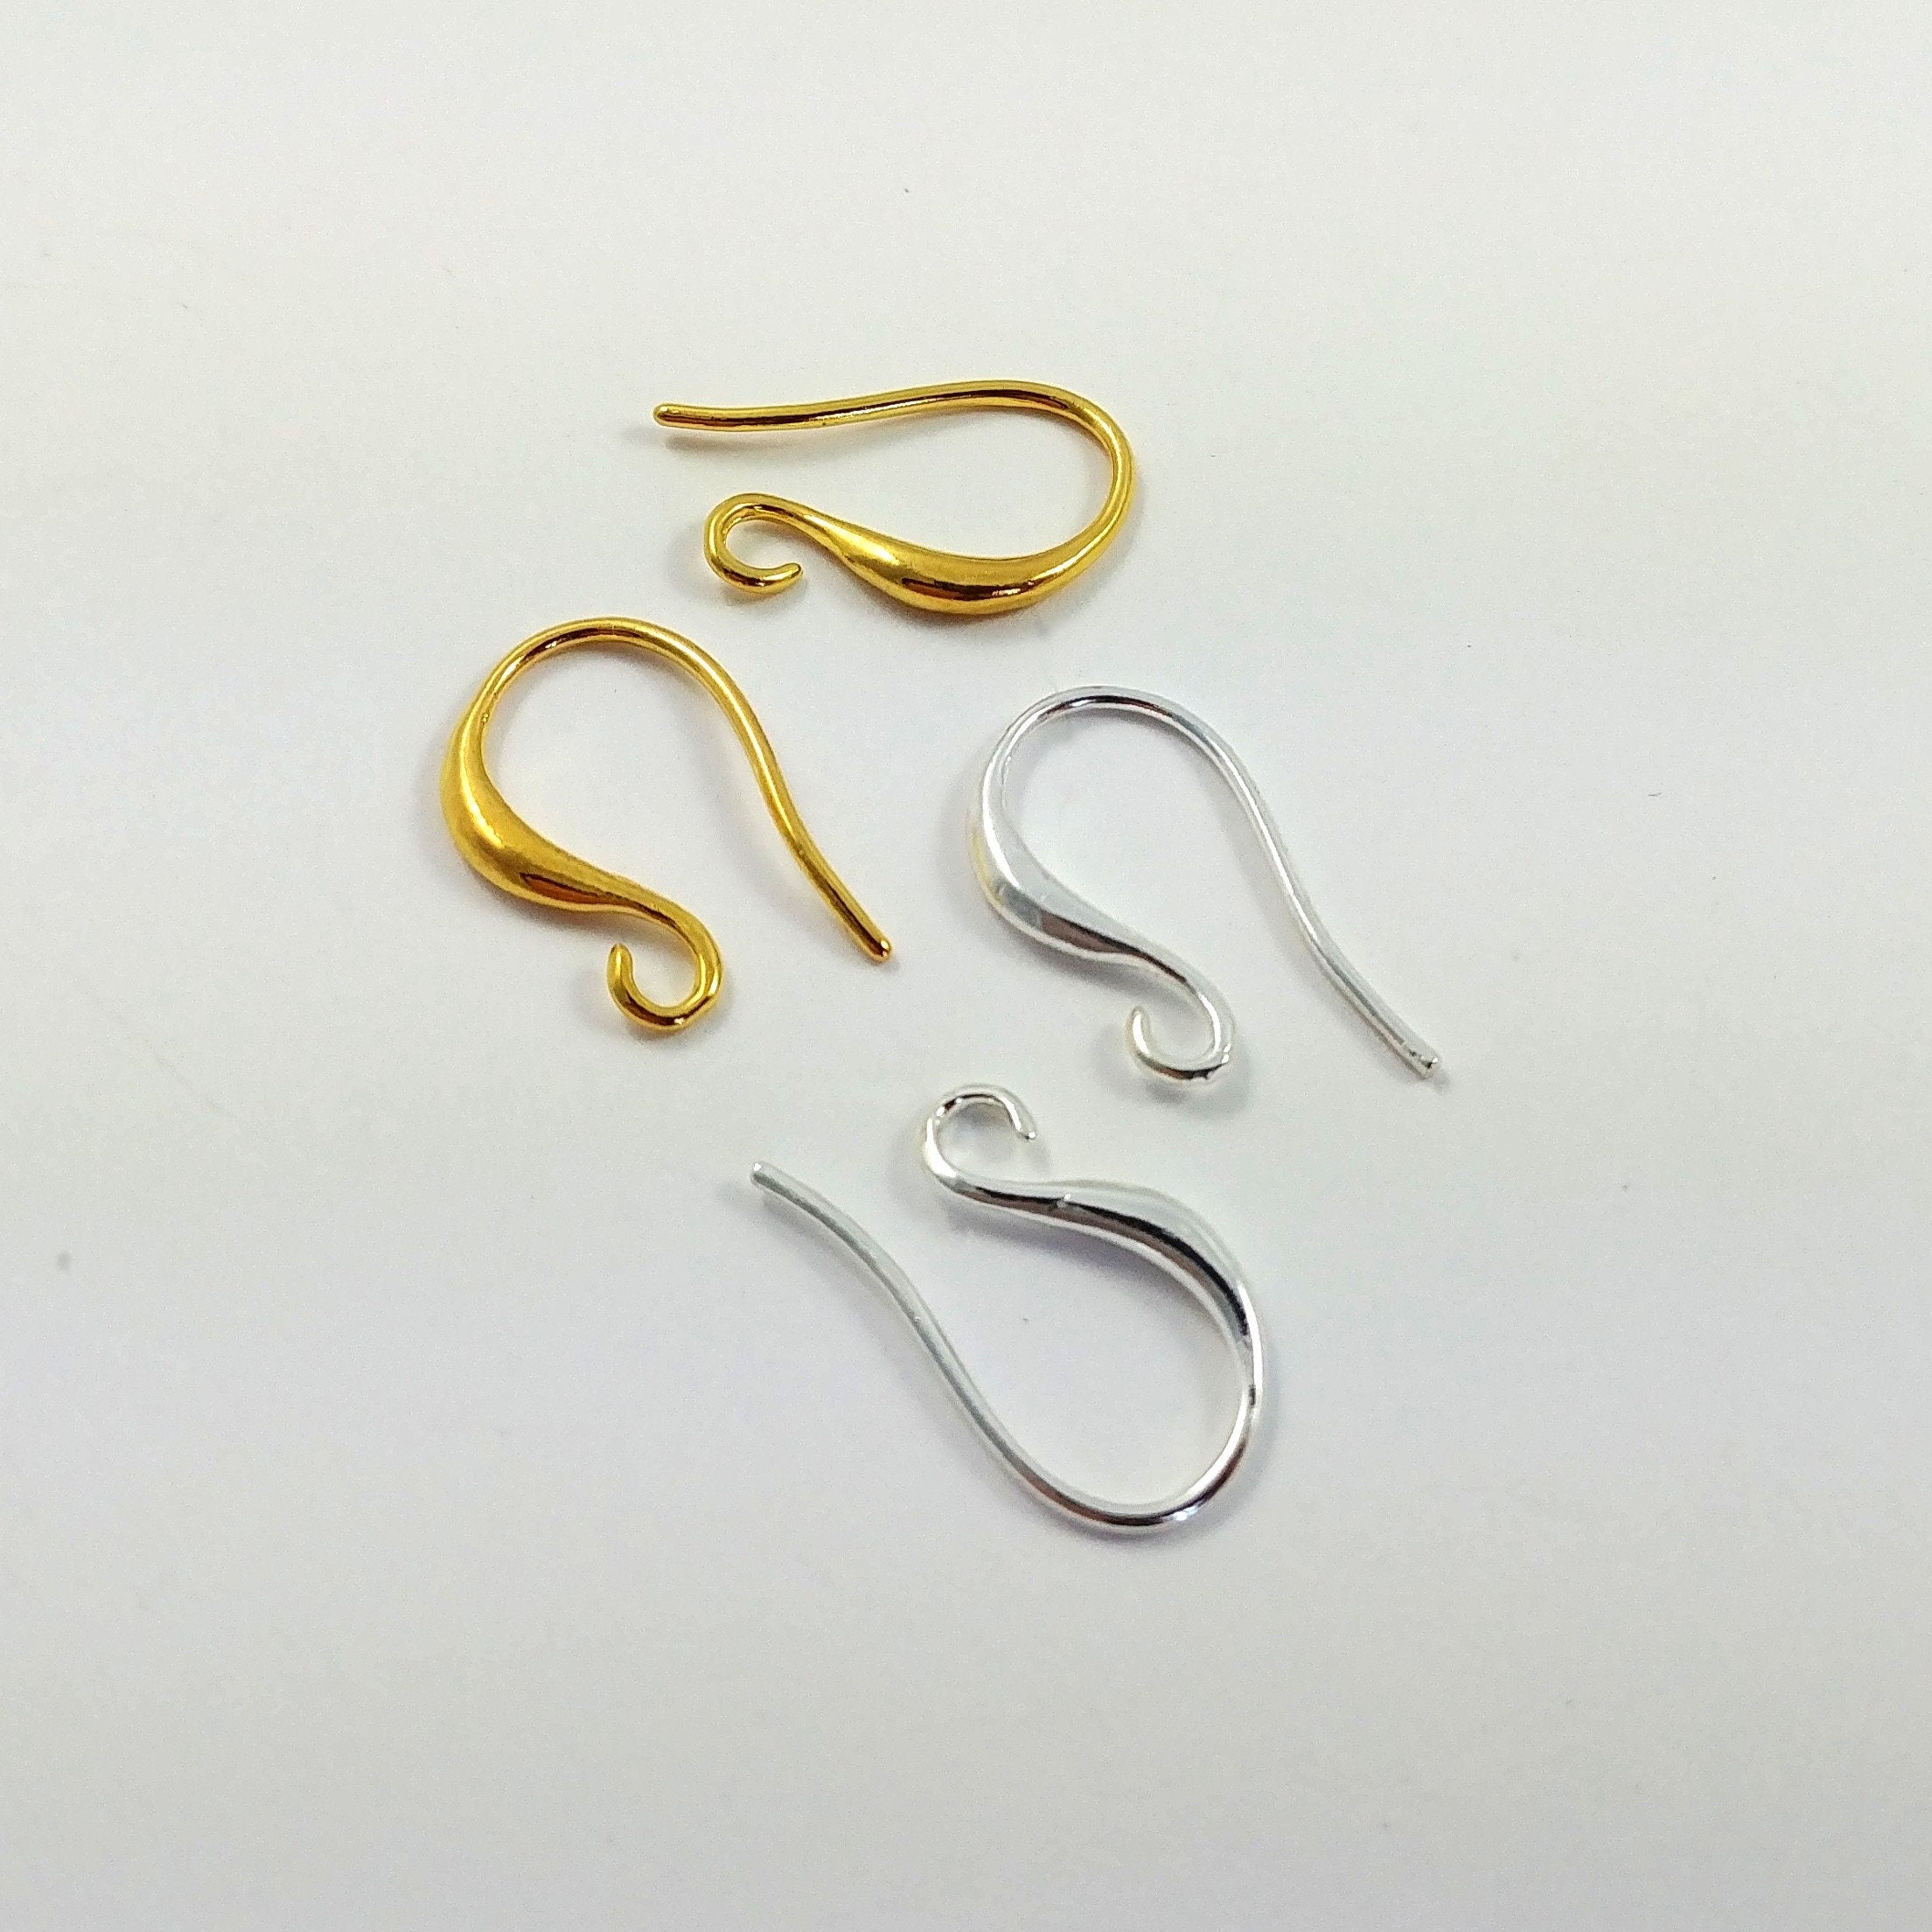 50,100,150,200 pieces Gold Plated Ear Wires,Drop Earring Wire, hook earring  with loop, Gold metal earwires,Wholesale